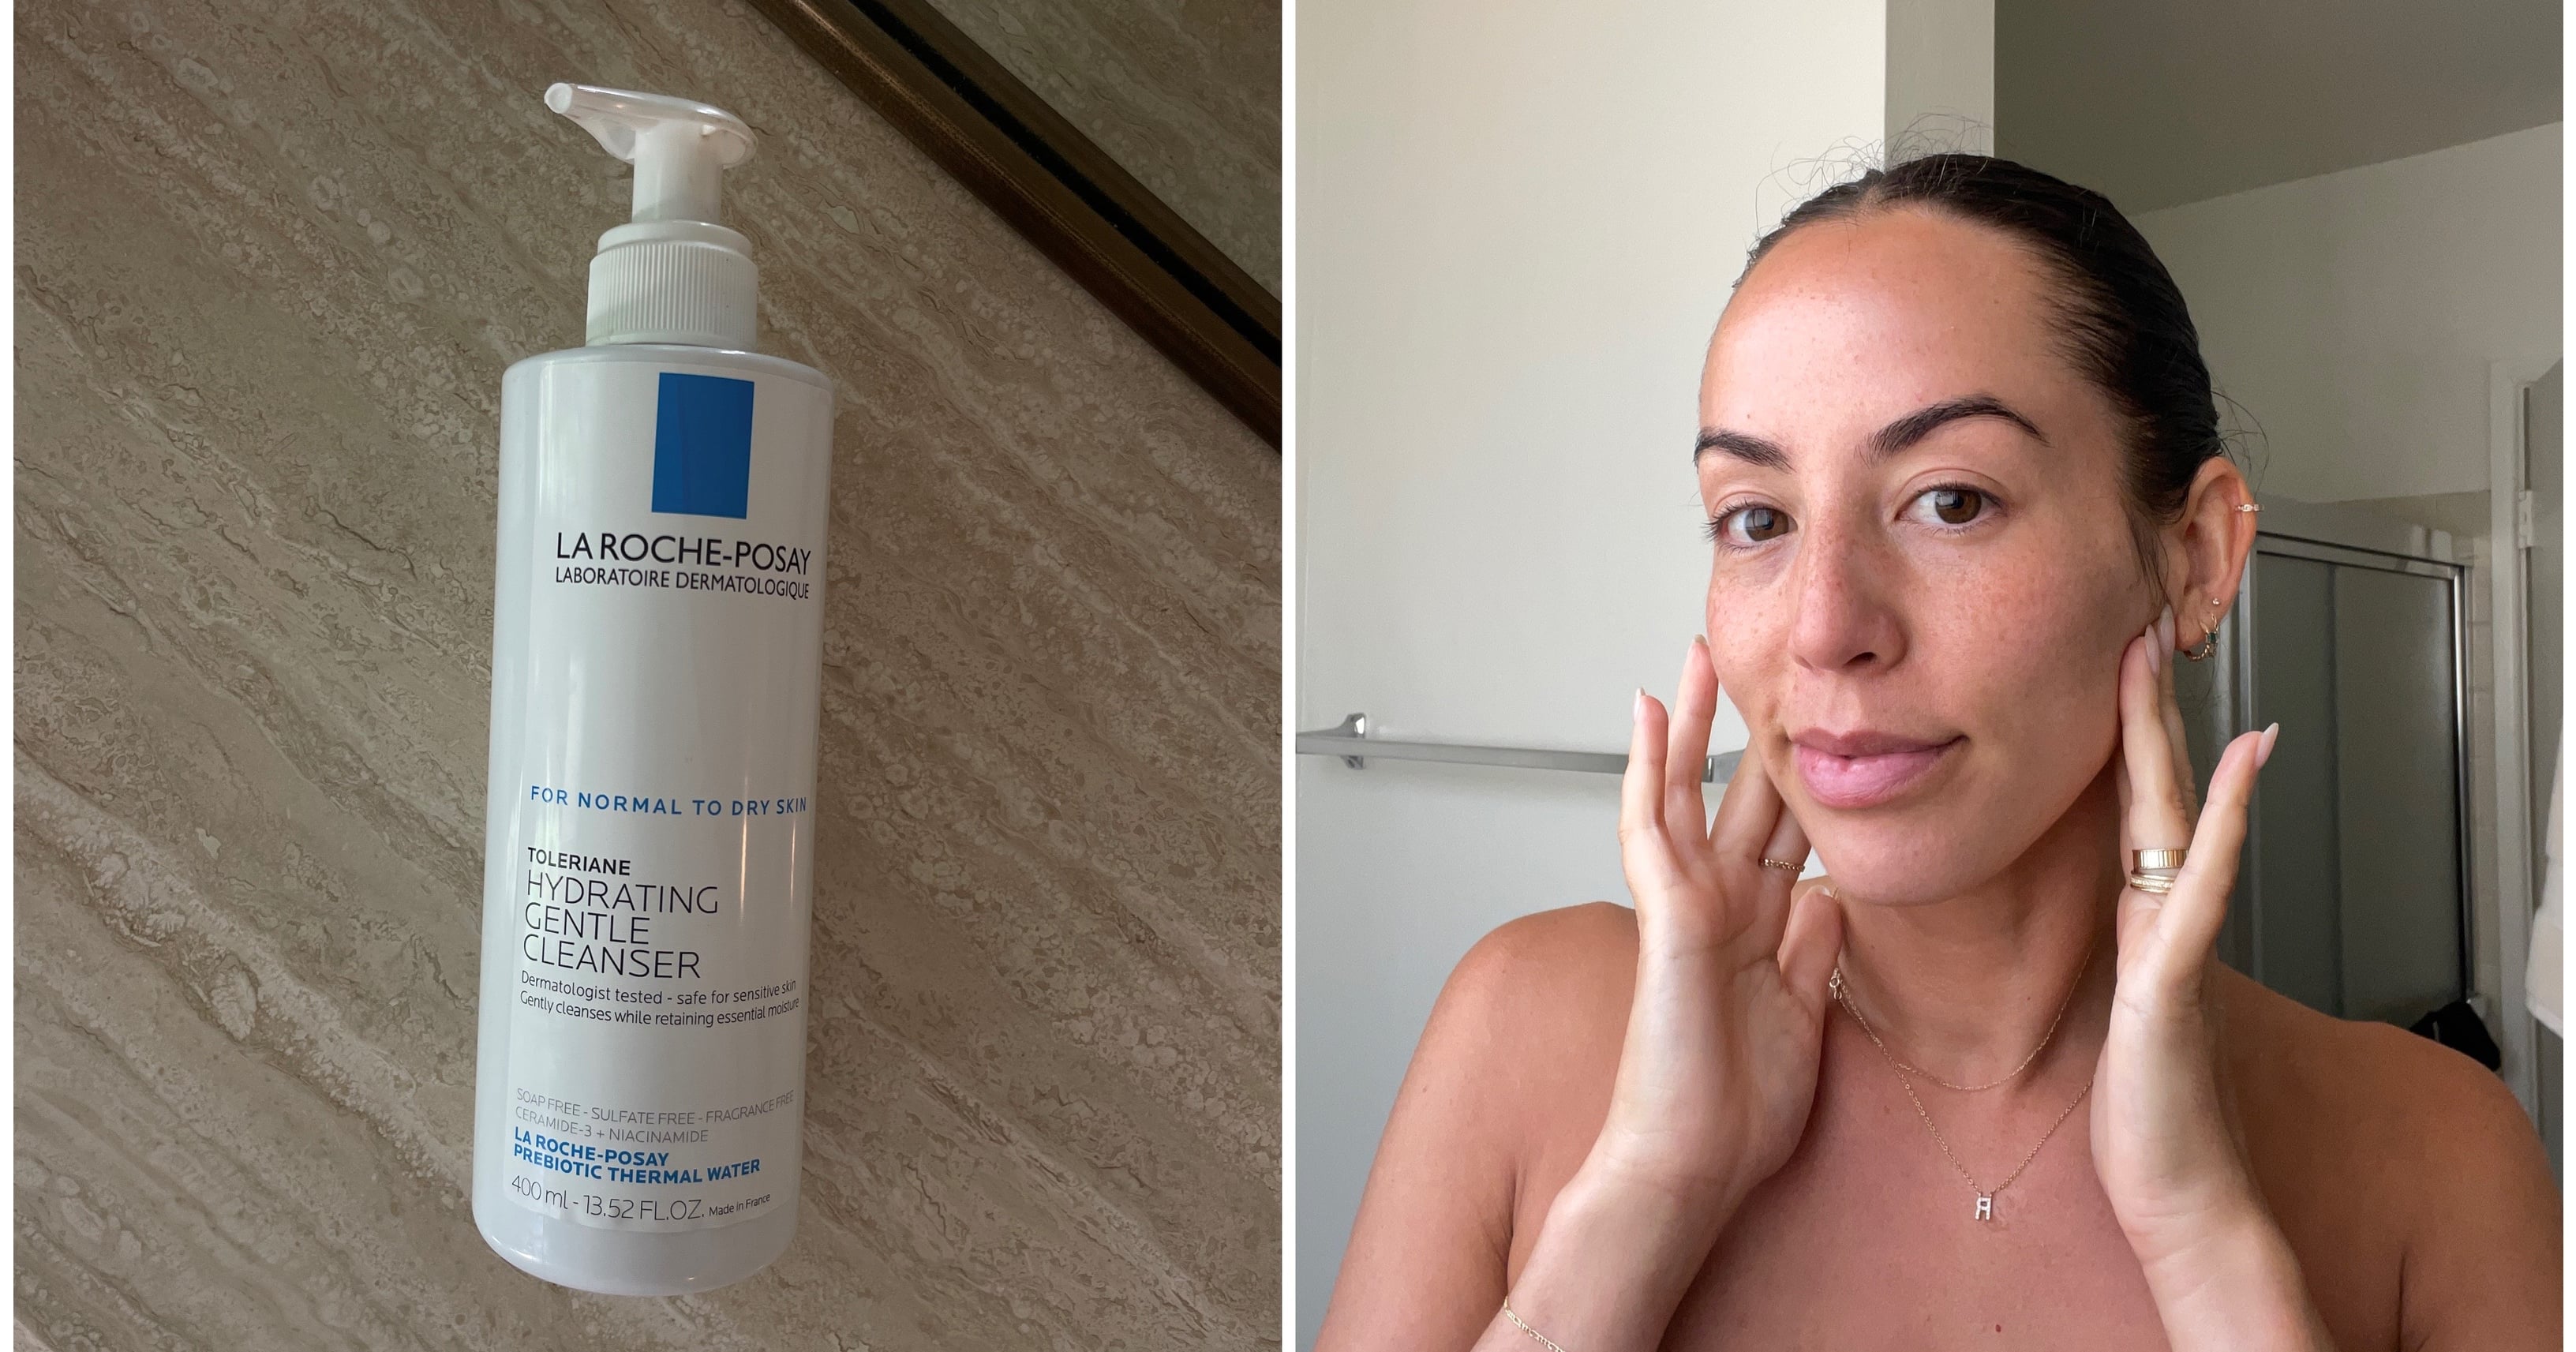 La Roche-Posay Toleriane Hydrating Gentle Cleanser Review